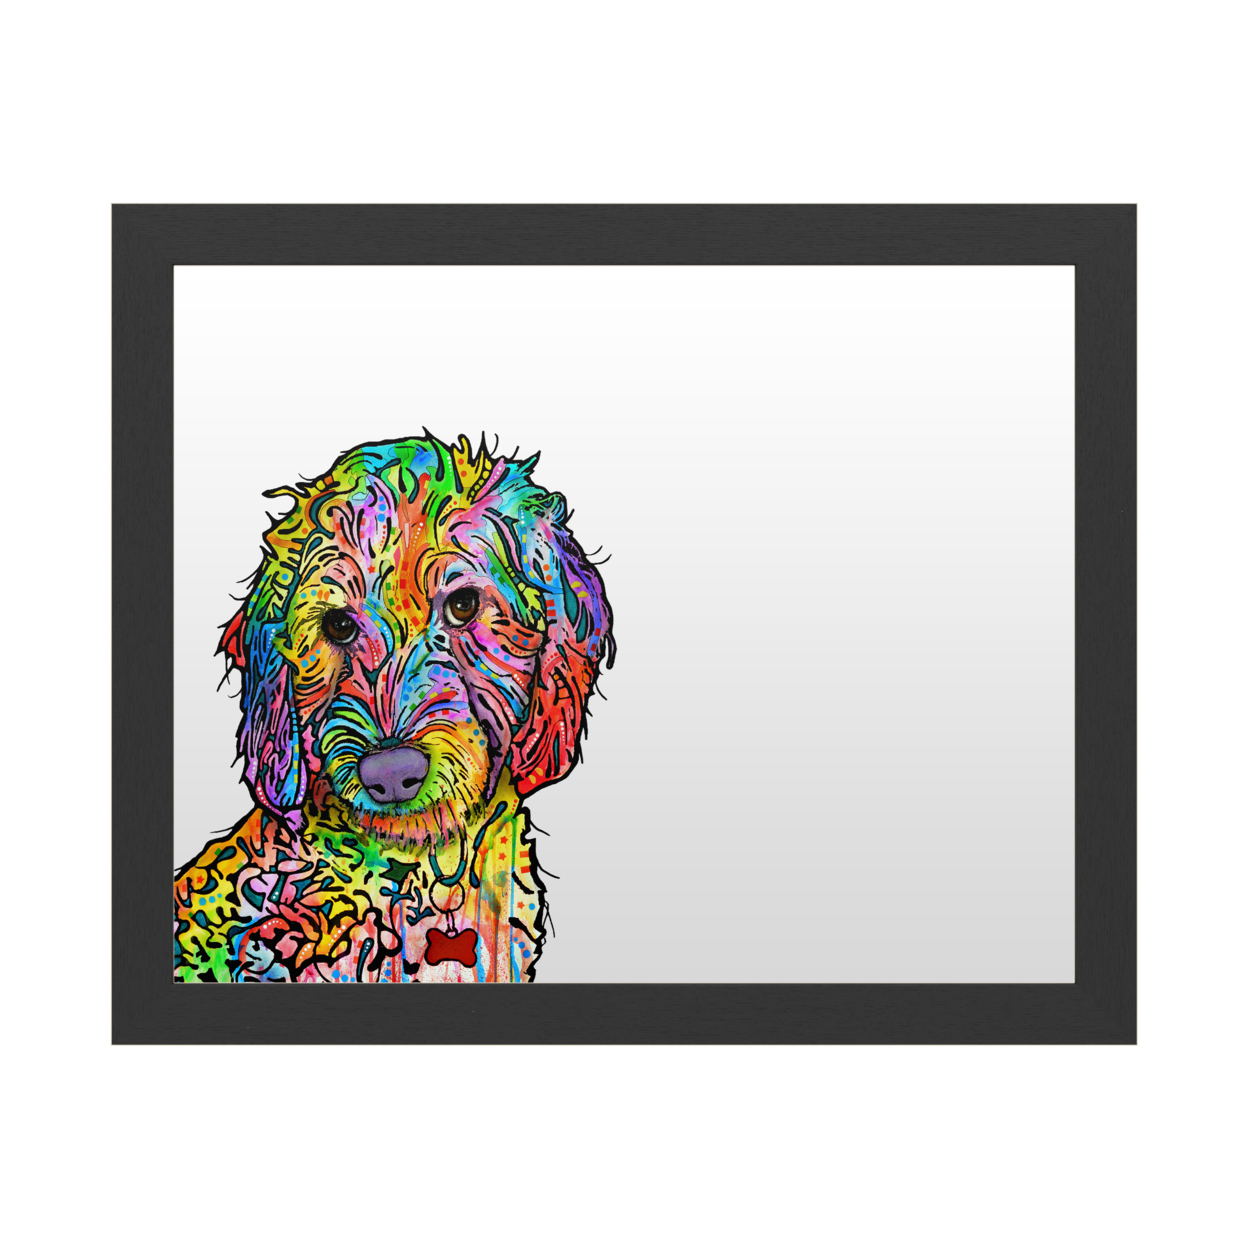 Dry Erase 16 X 20 Marker Board With Printed Artwork - Dean Russo Sweet Poodle White Board - Ready To Hang